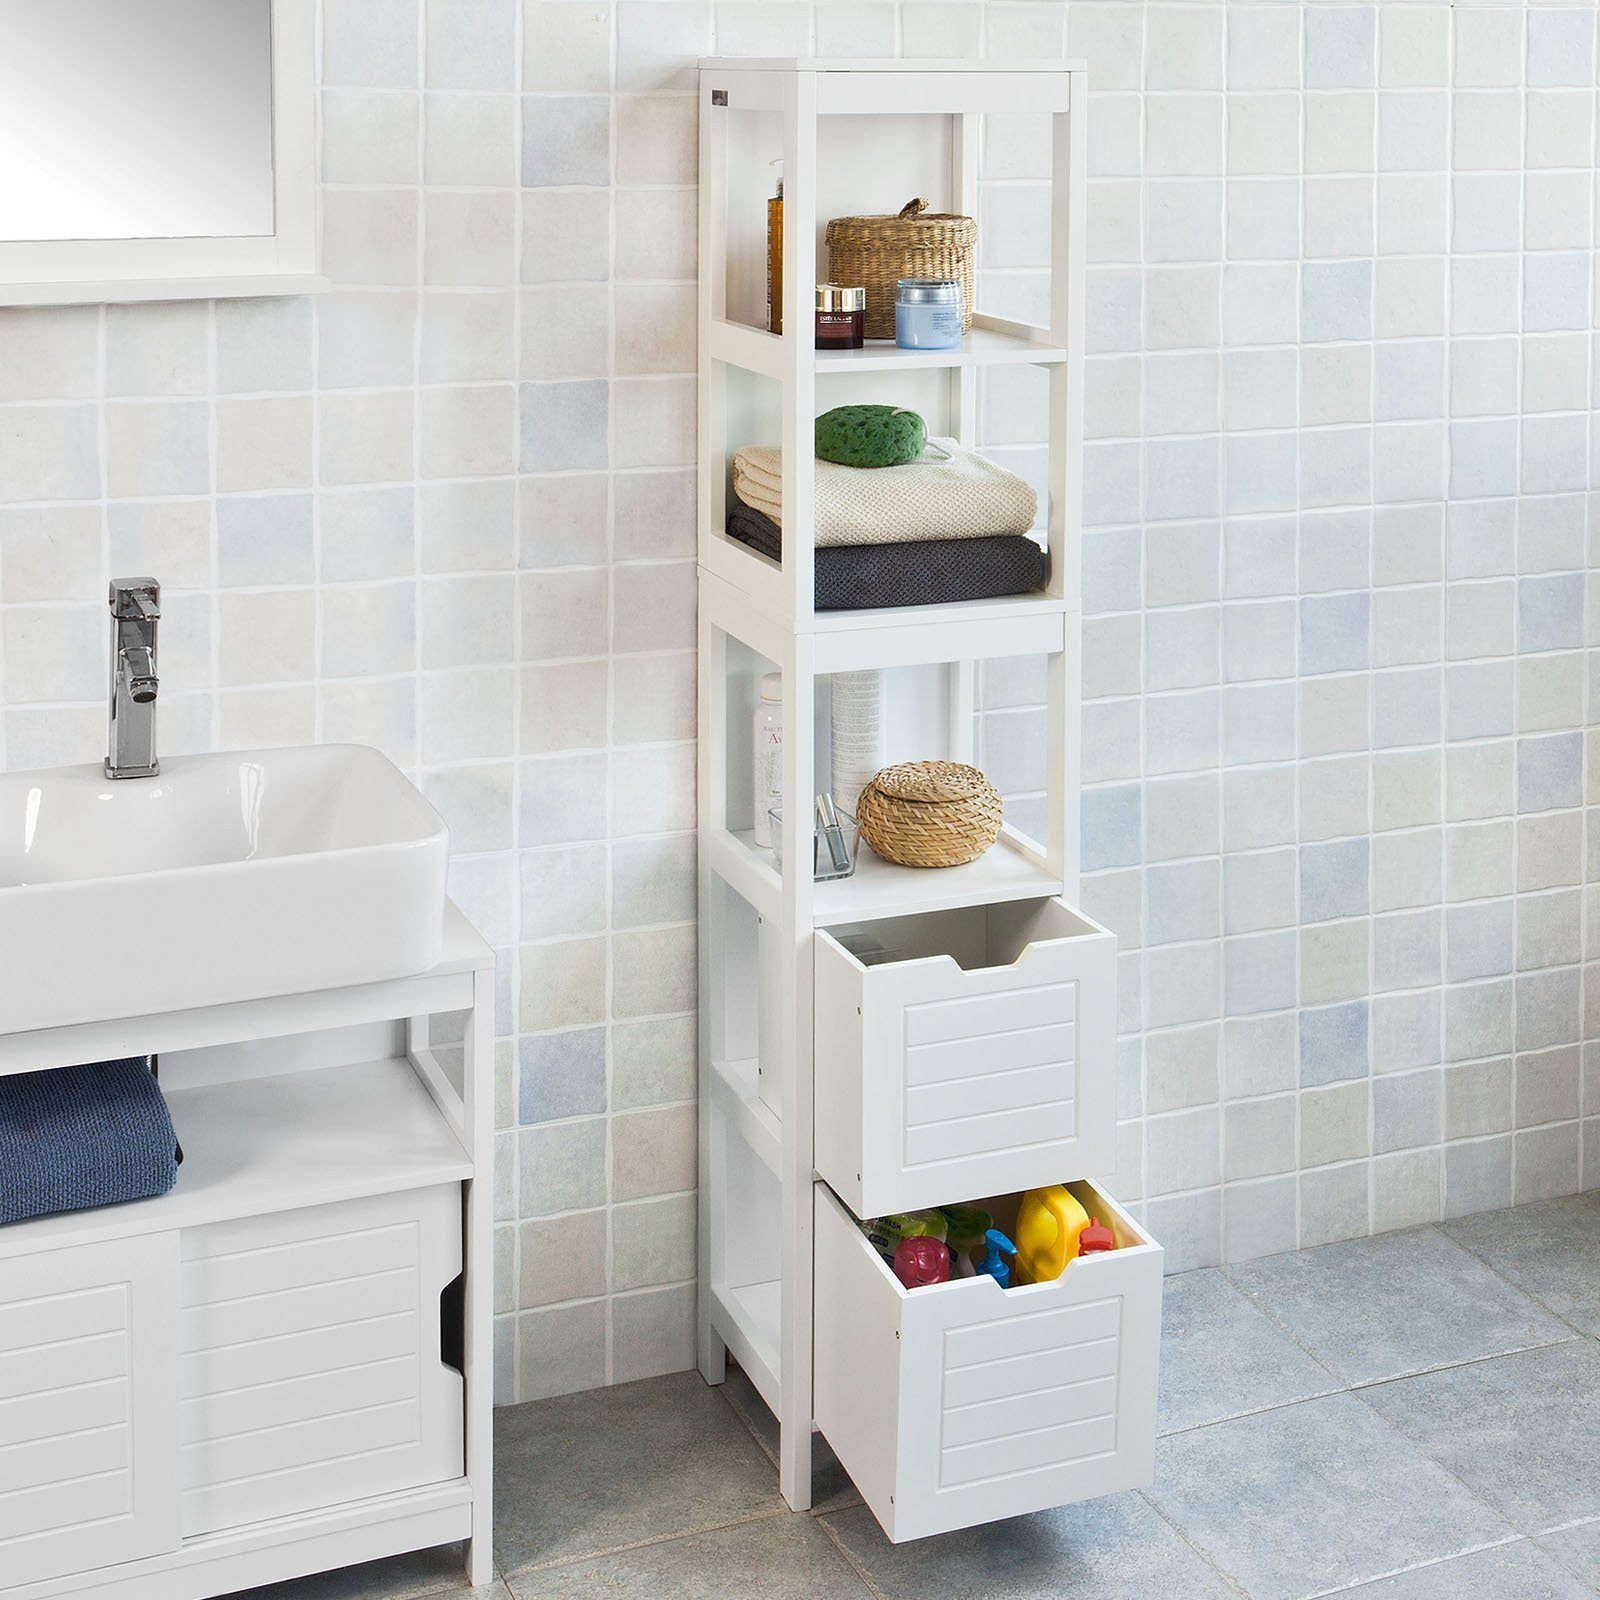 Tall Bathroom Cabinet With Doors
 Haotian White Floor Standing Tall Bathroom Storage Cabinet